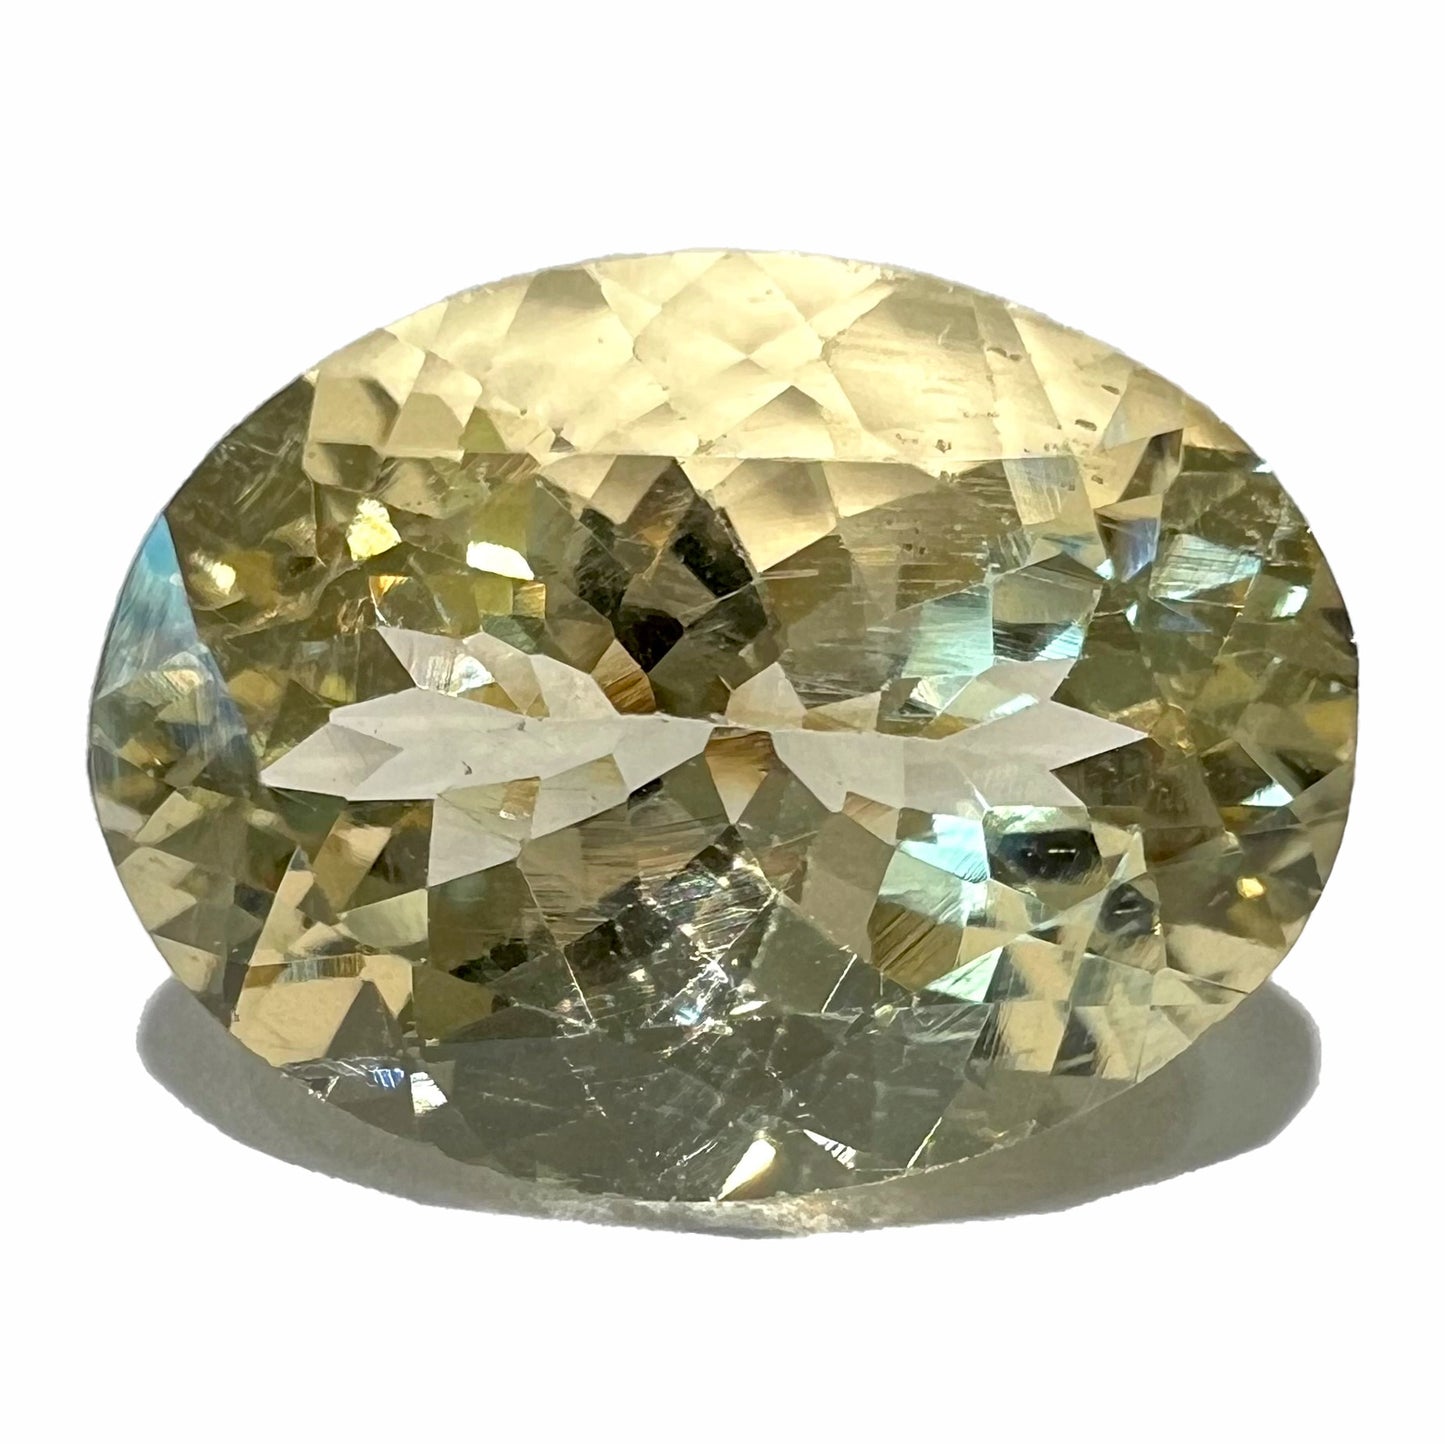 A loose, faceted oval cut citrine stone.  The stone is light yellow in color and weighs 8.35 carats.